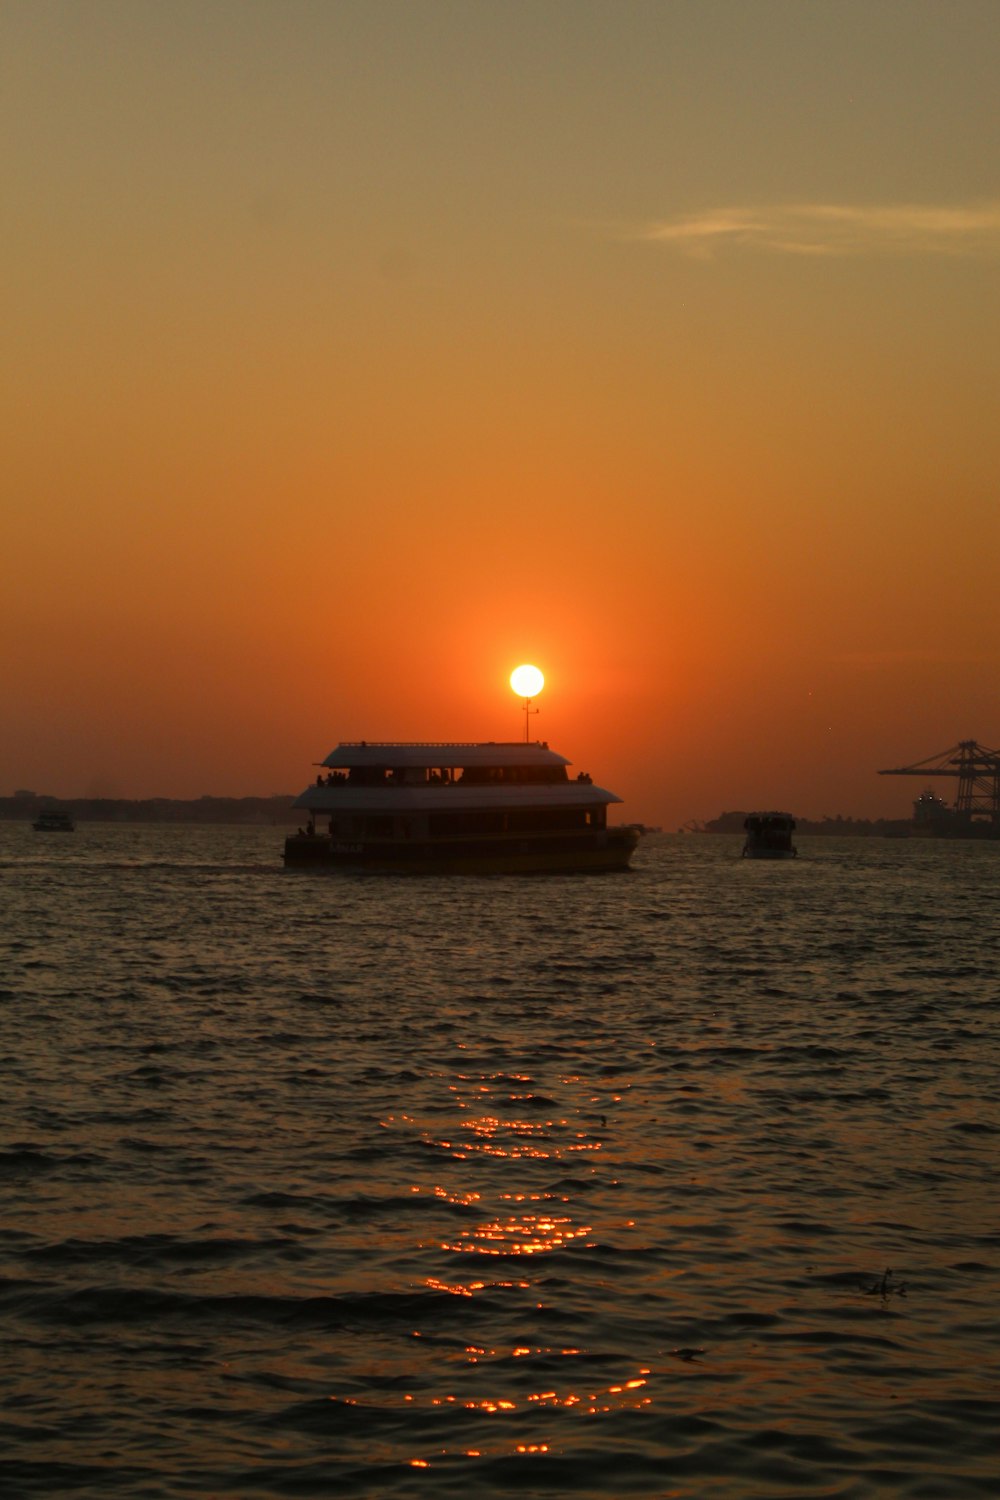 a boat in a body of water at sunset